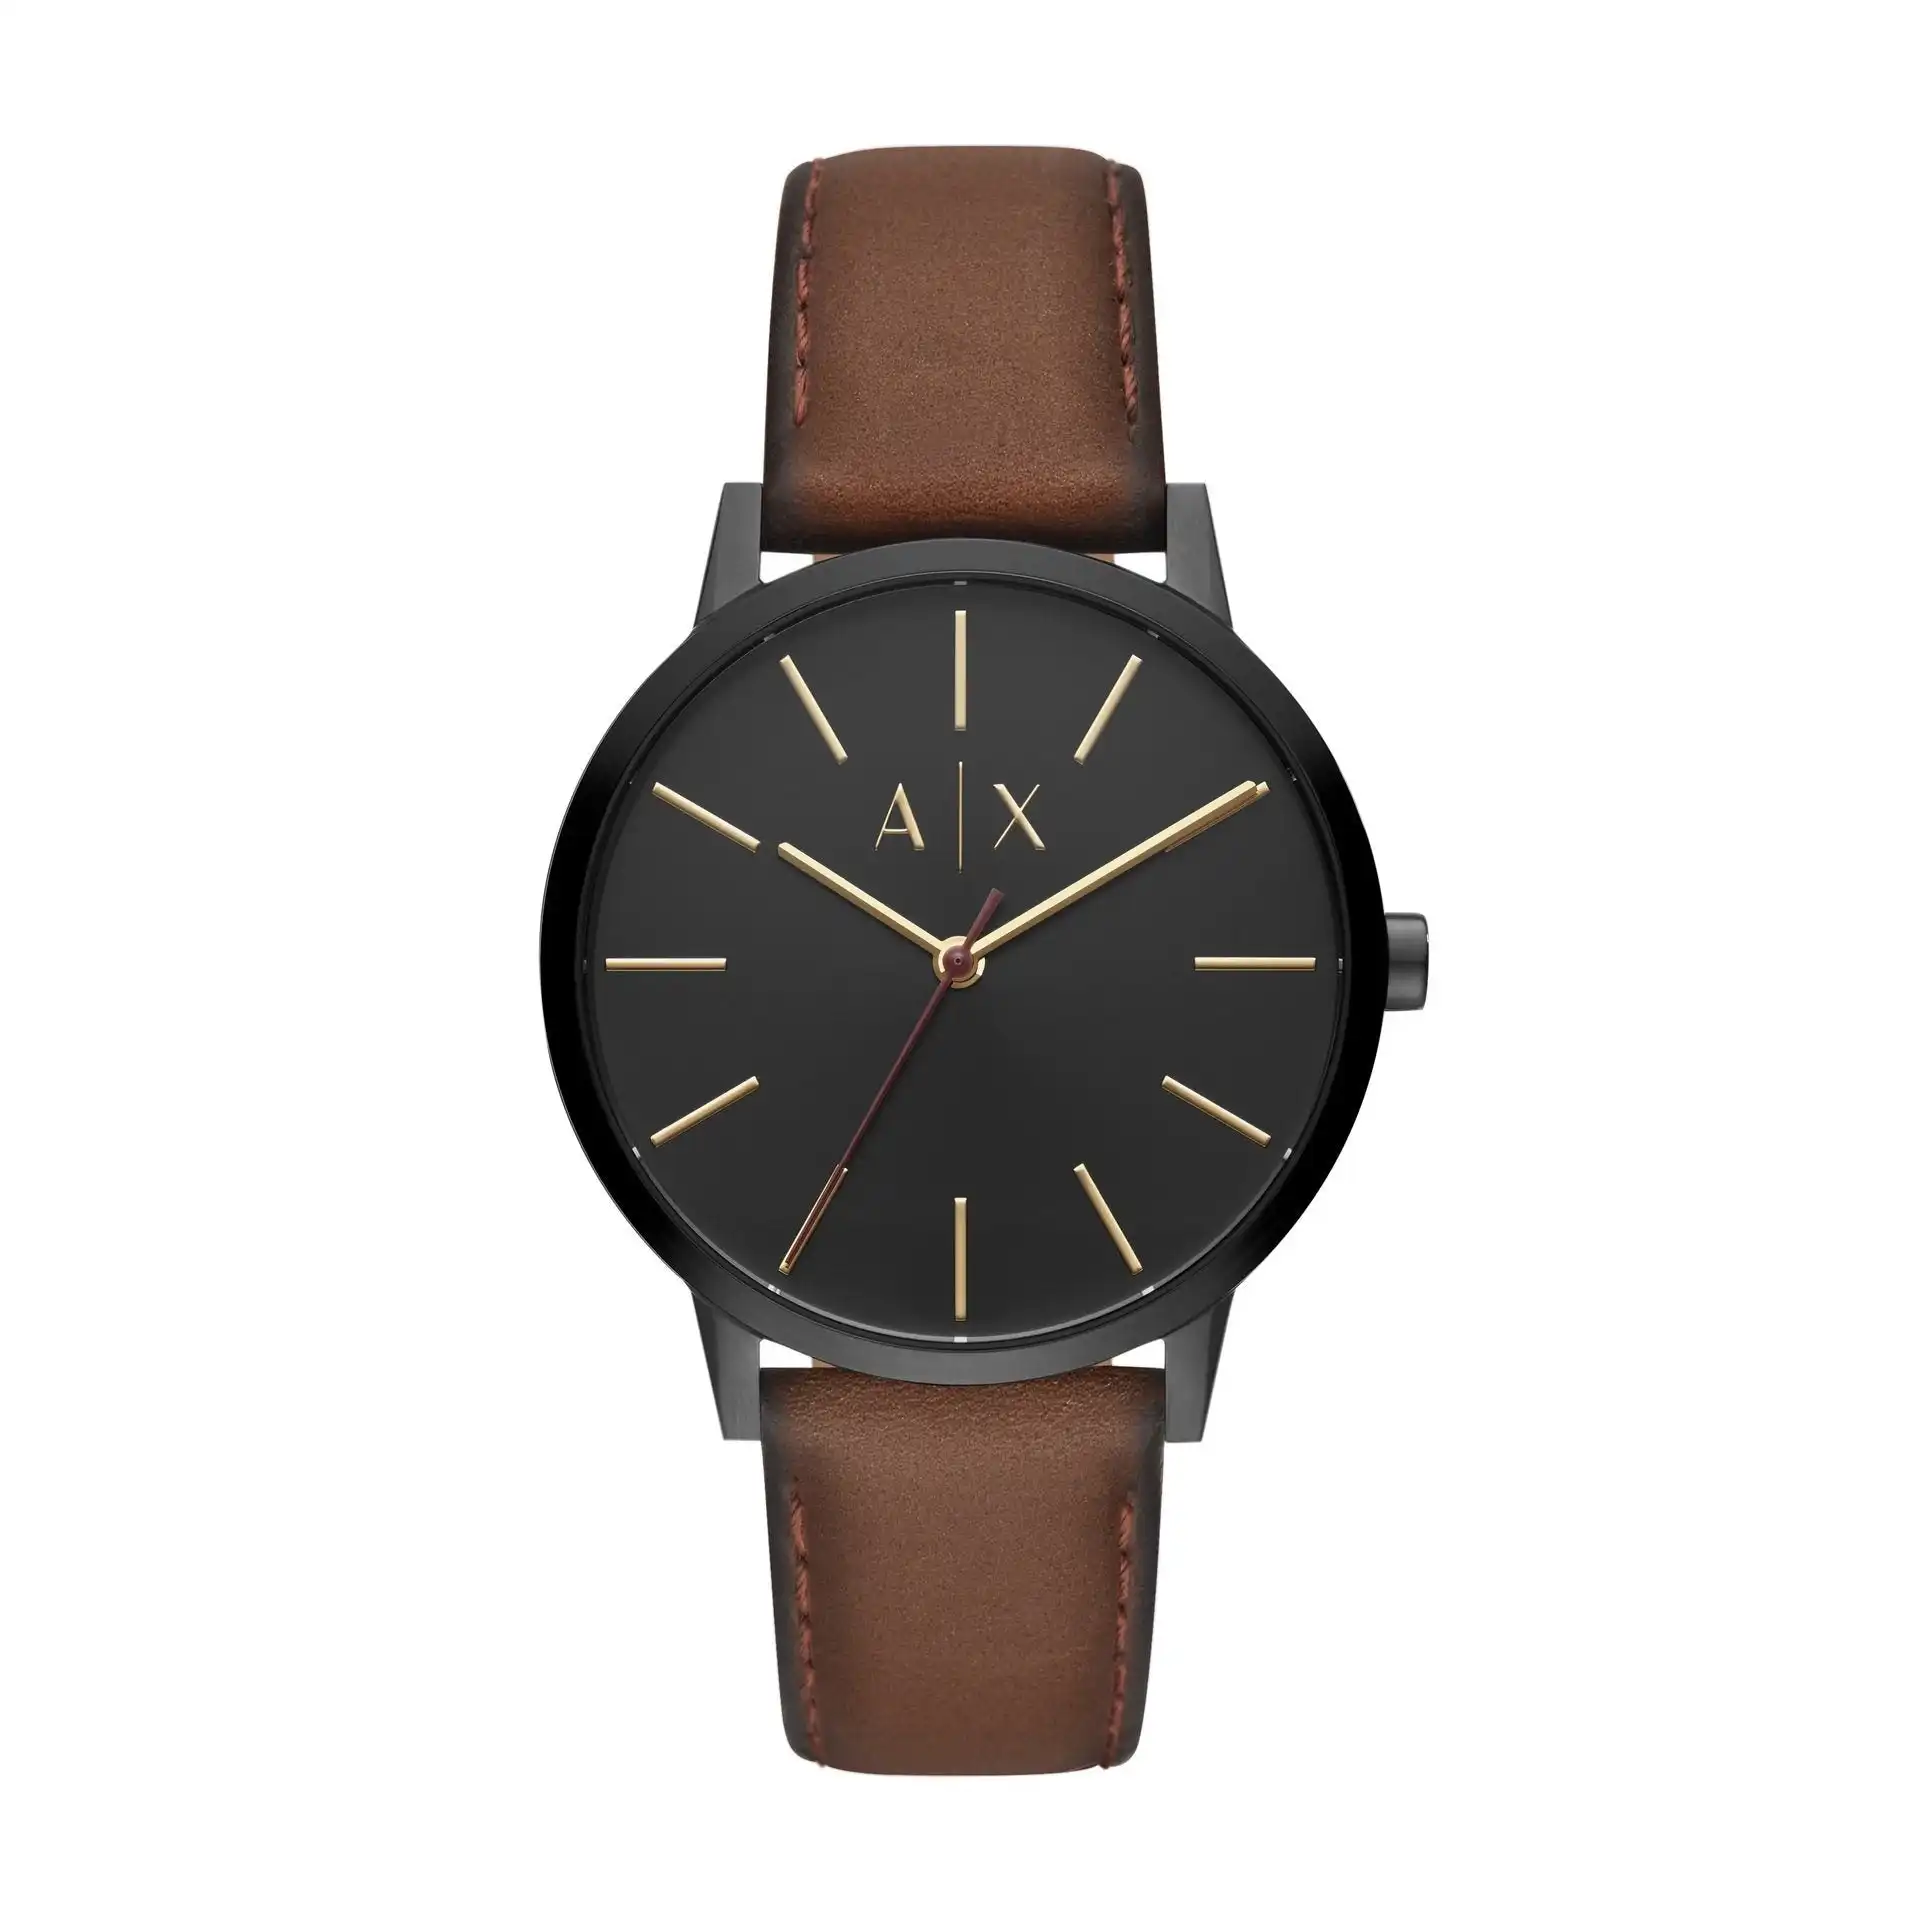 Armani Exchange Cayde Black and Brown Leather Watch AX2706